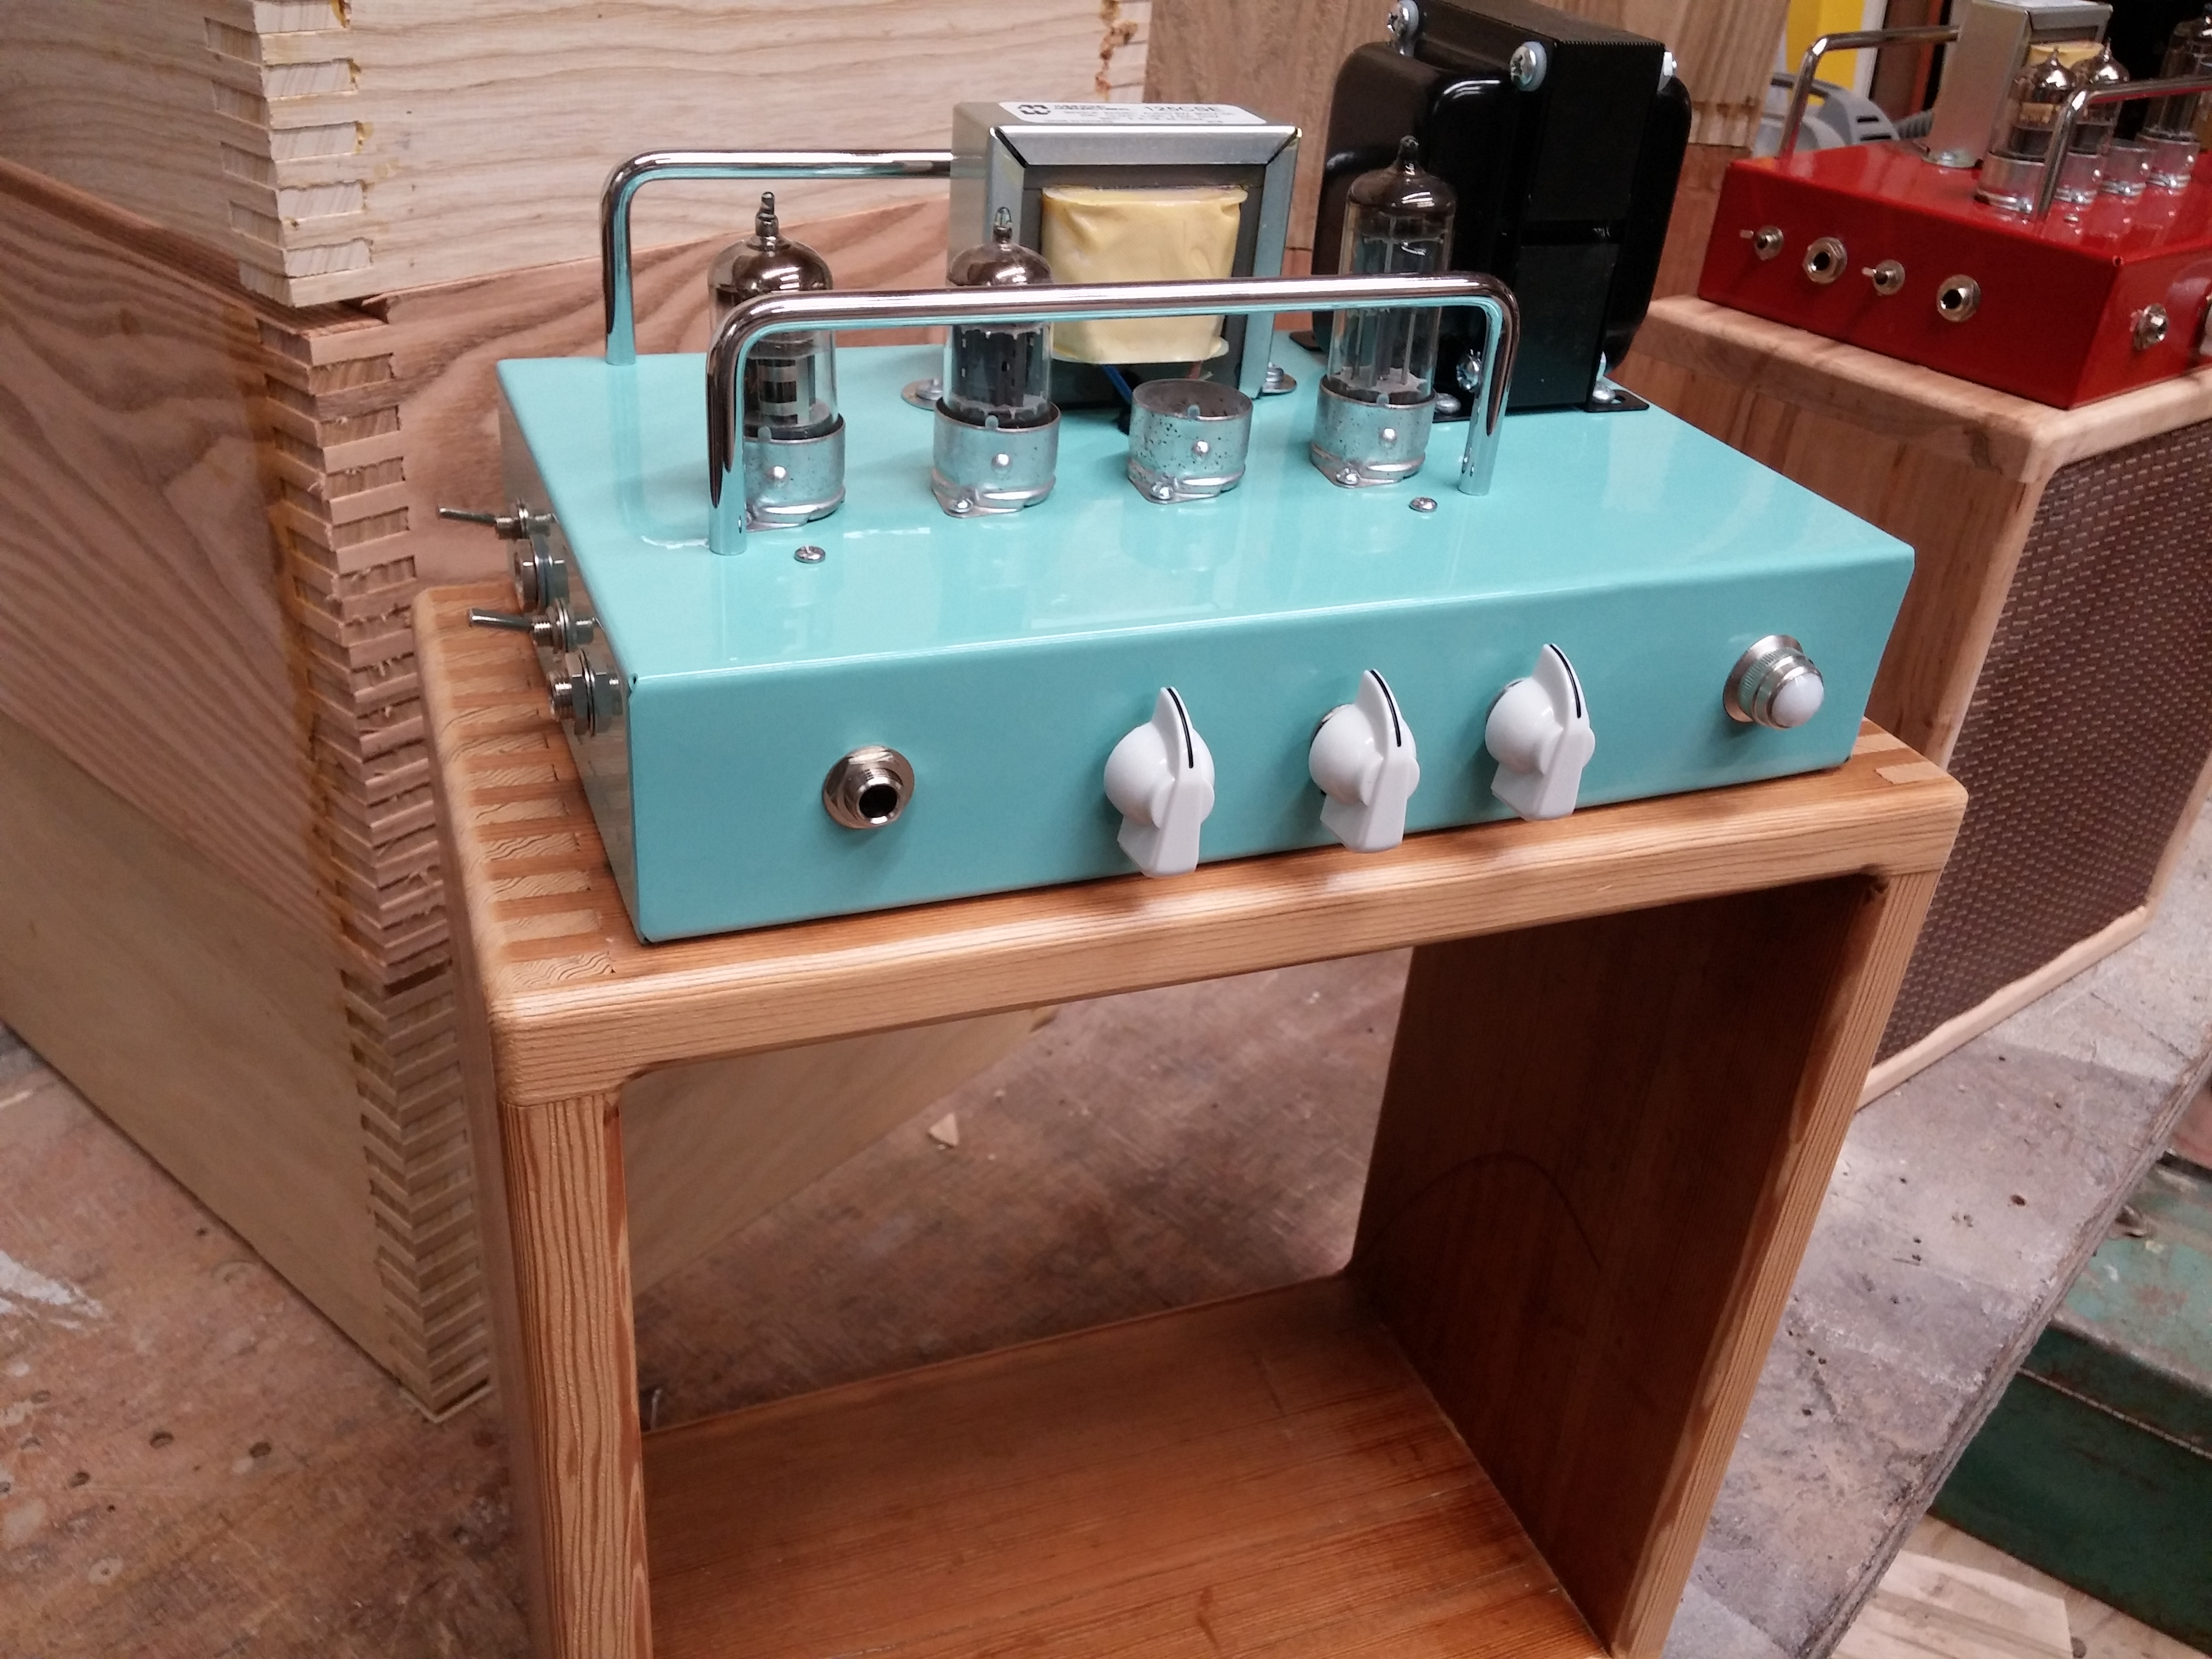 Turquoise Audity One guitar amp by Curious Audio